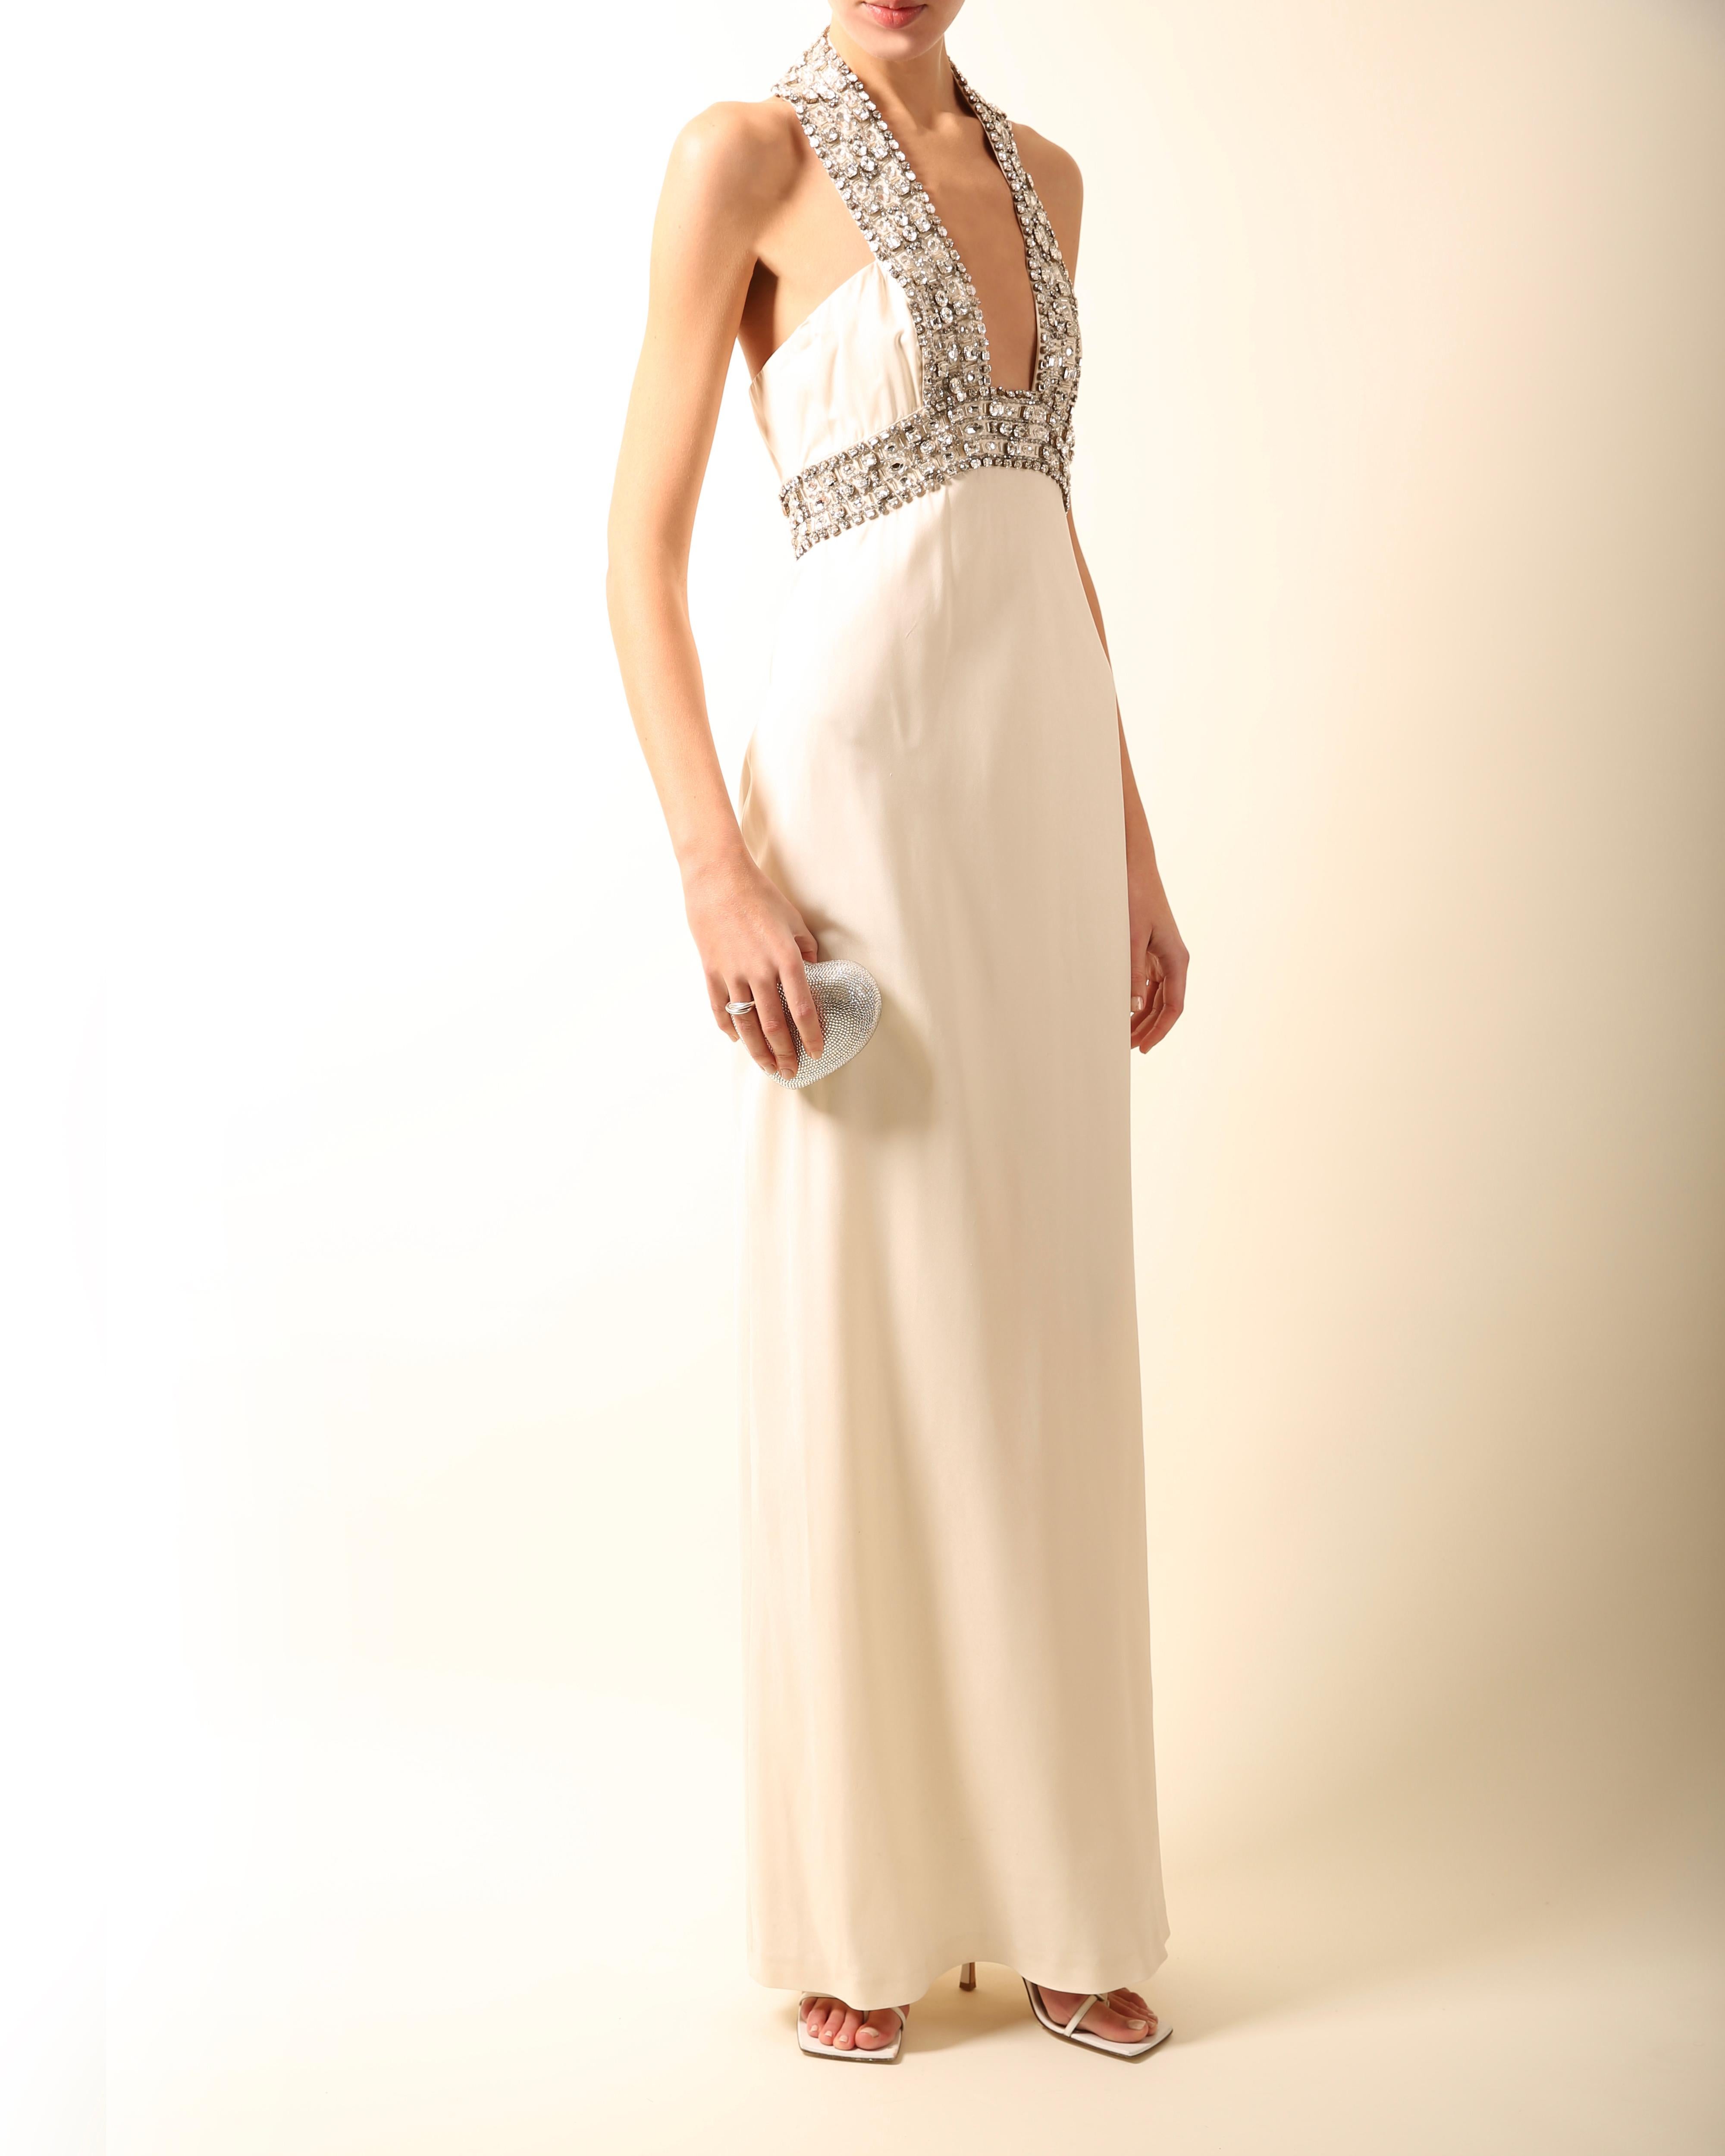 Women's Azzaro white ivory crystal embellished low cut out halter neck dress gown 36